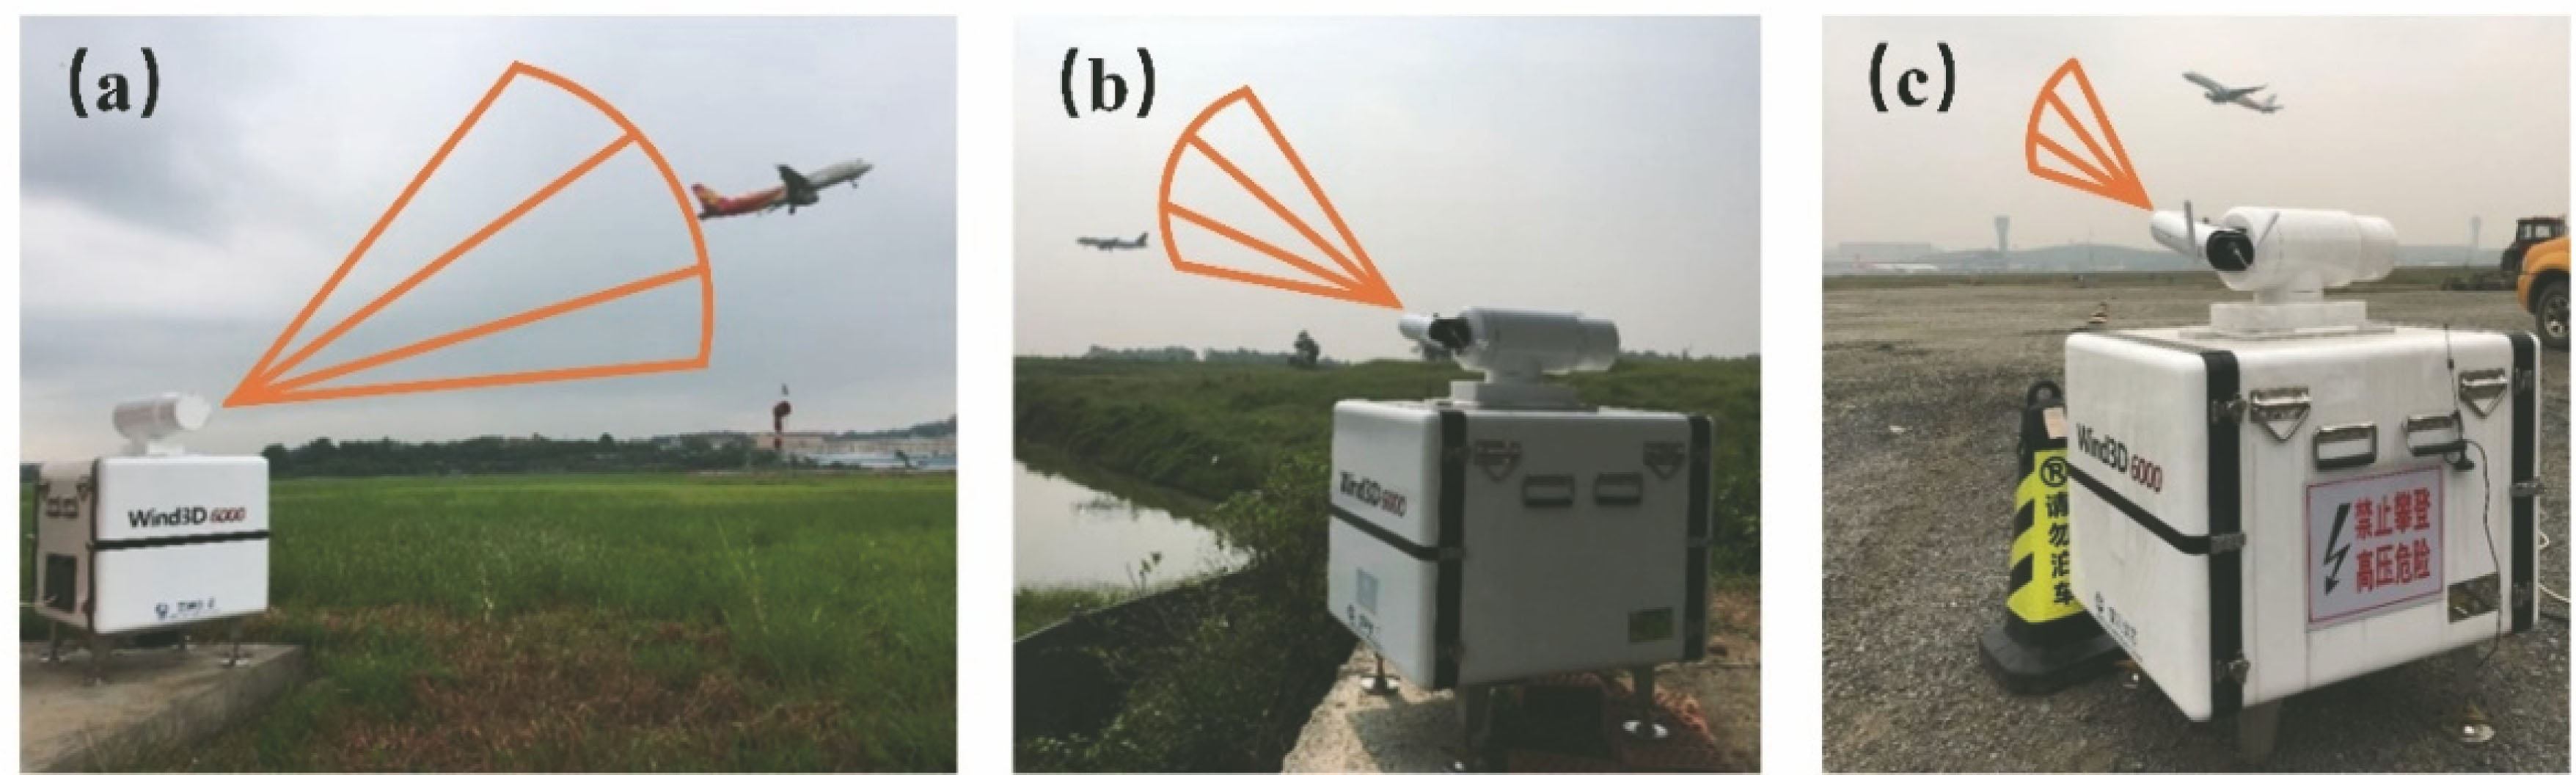 Location and layout of wake vortex observation. (a) MNA; (b) CSIA(landing stage); (c) CSIA(take-off stage)